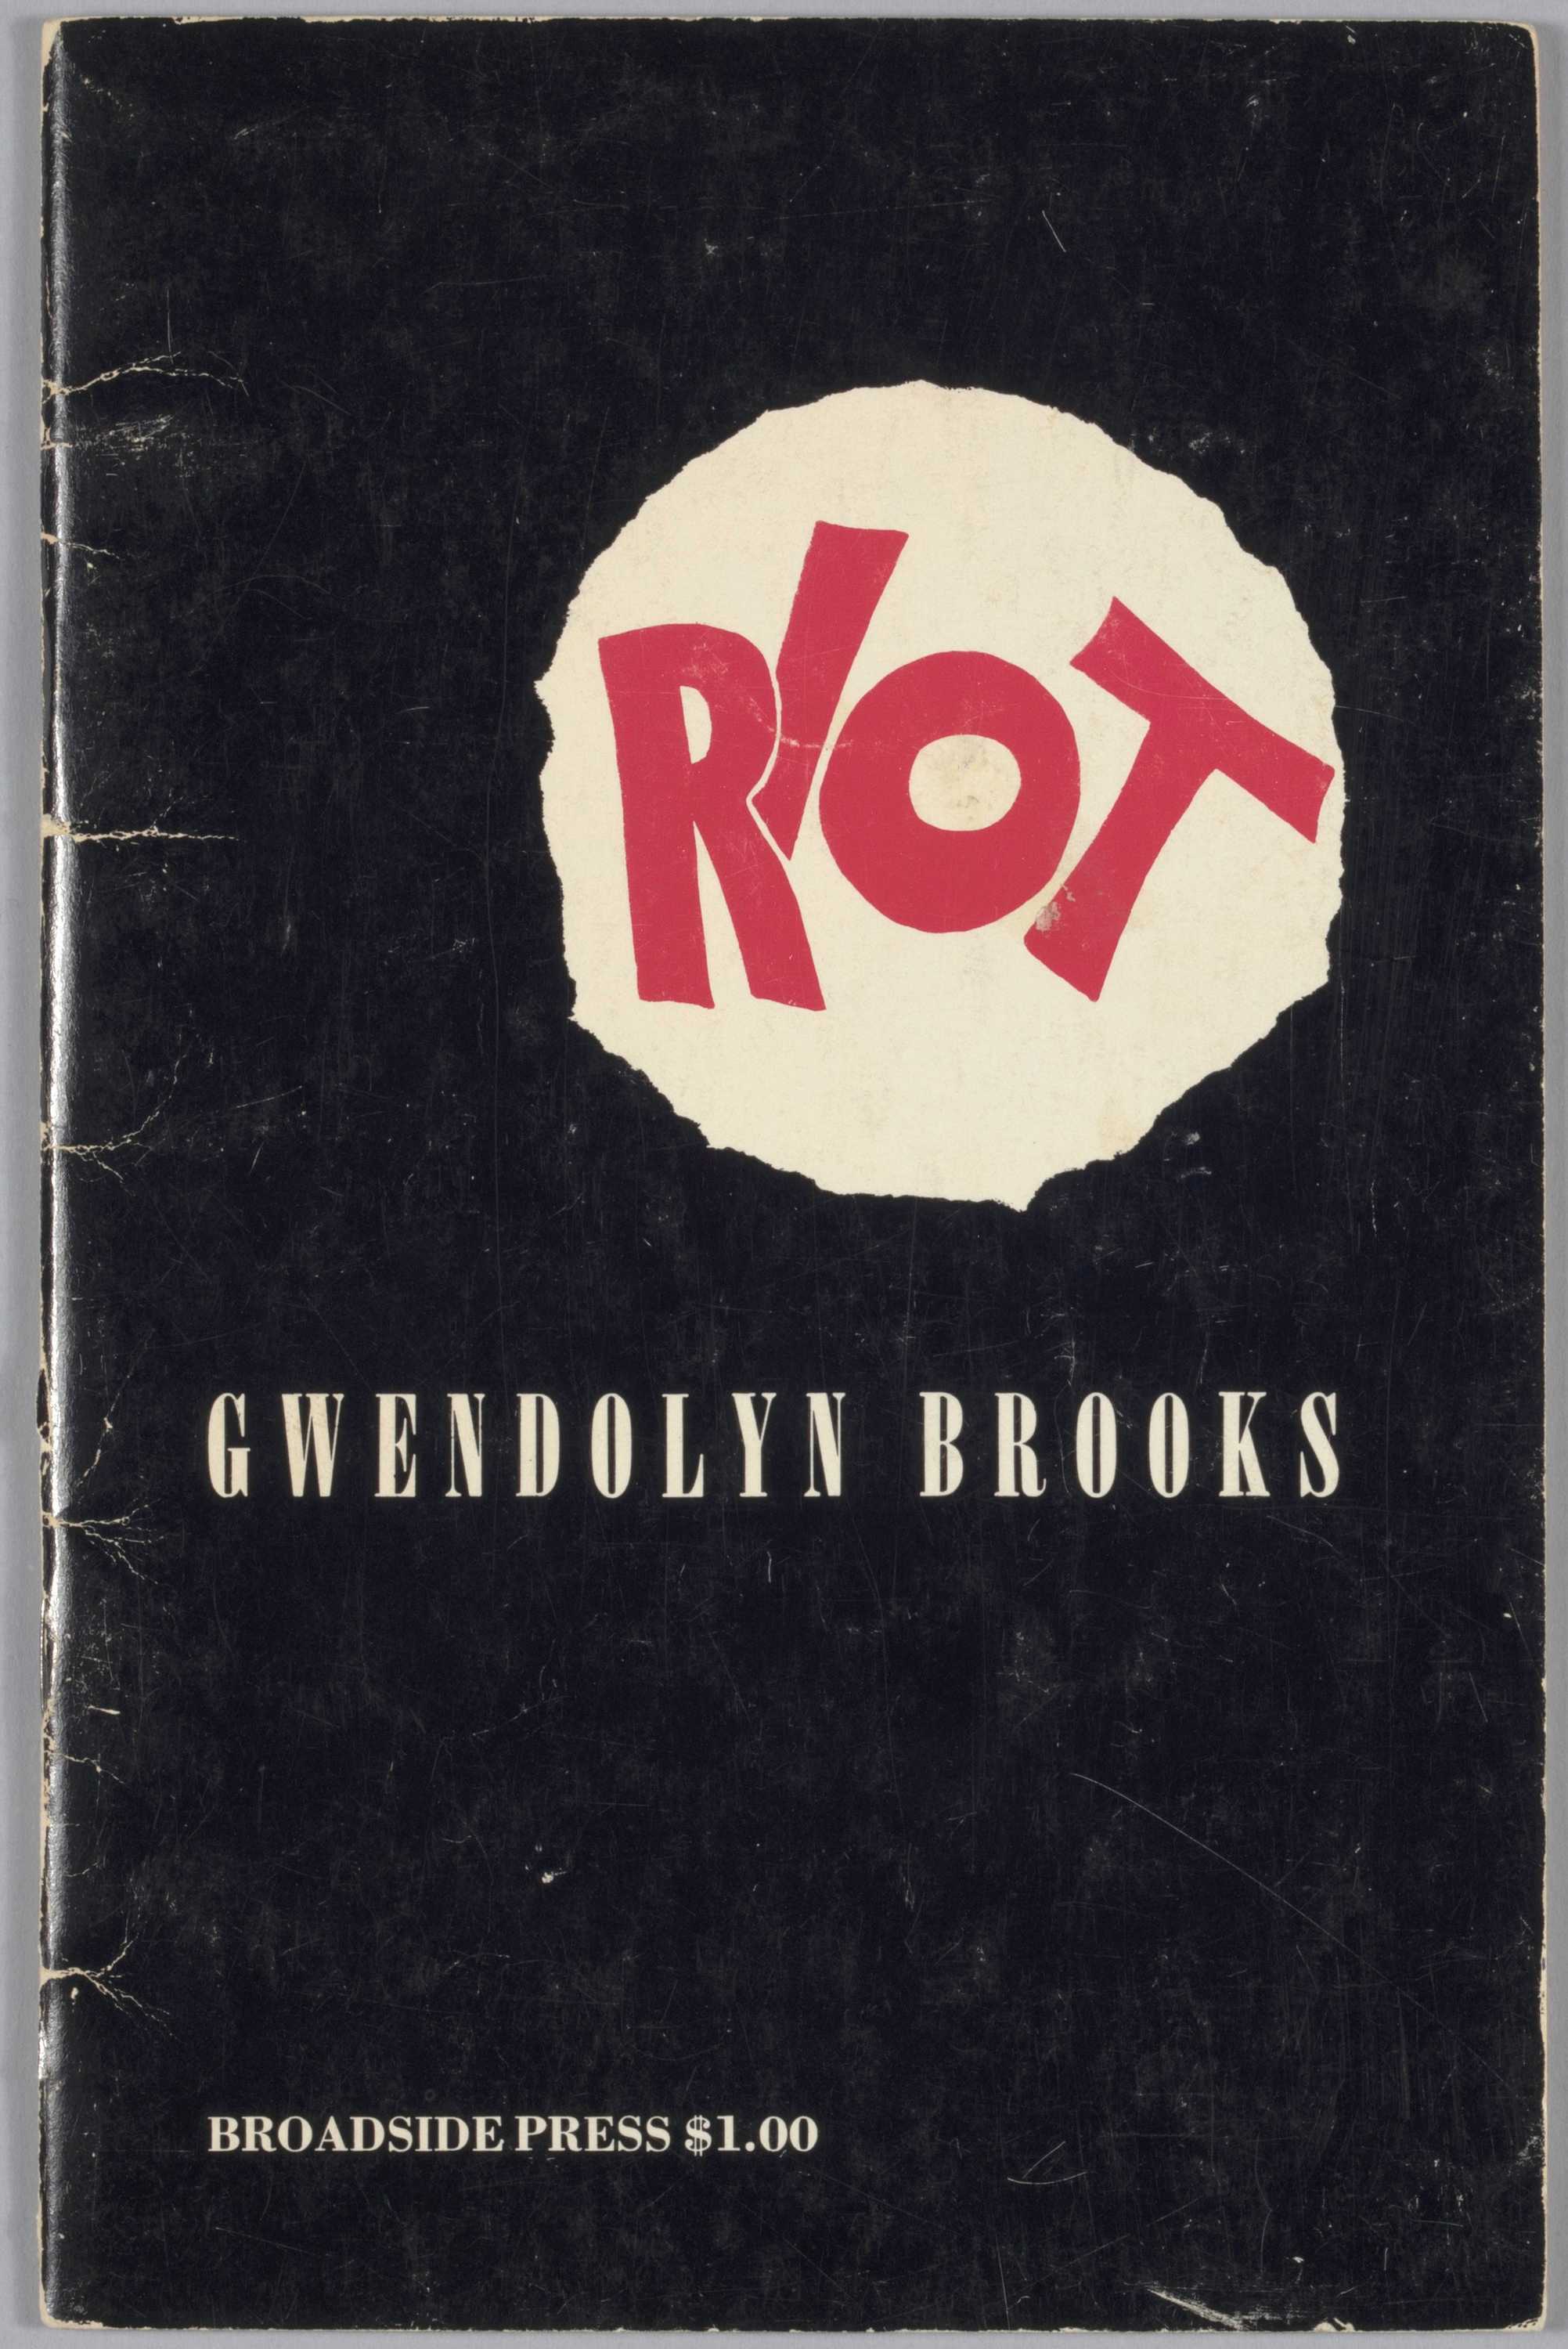 This is a paperback volume of poetry with black cover and the word "RIOT" in red san-serif typeface within a white irregular circle.